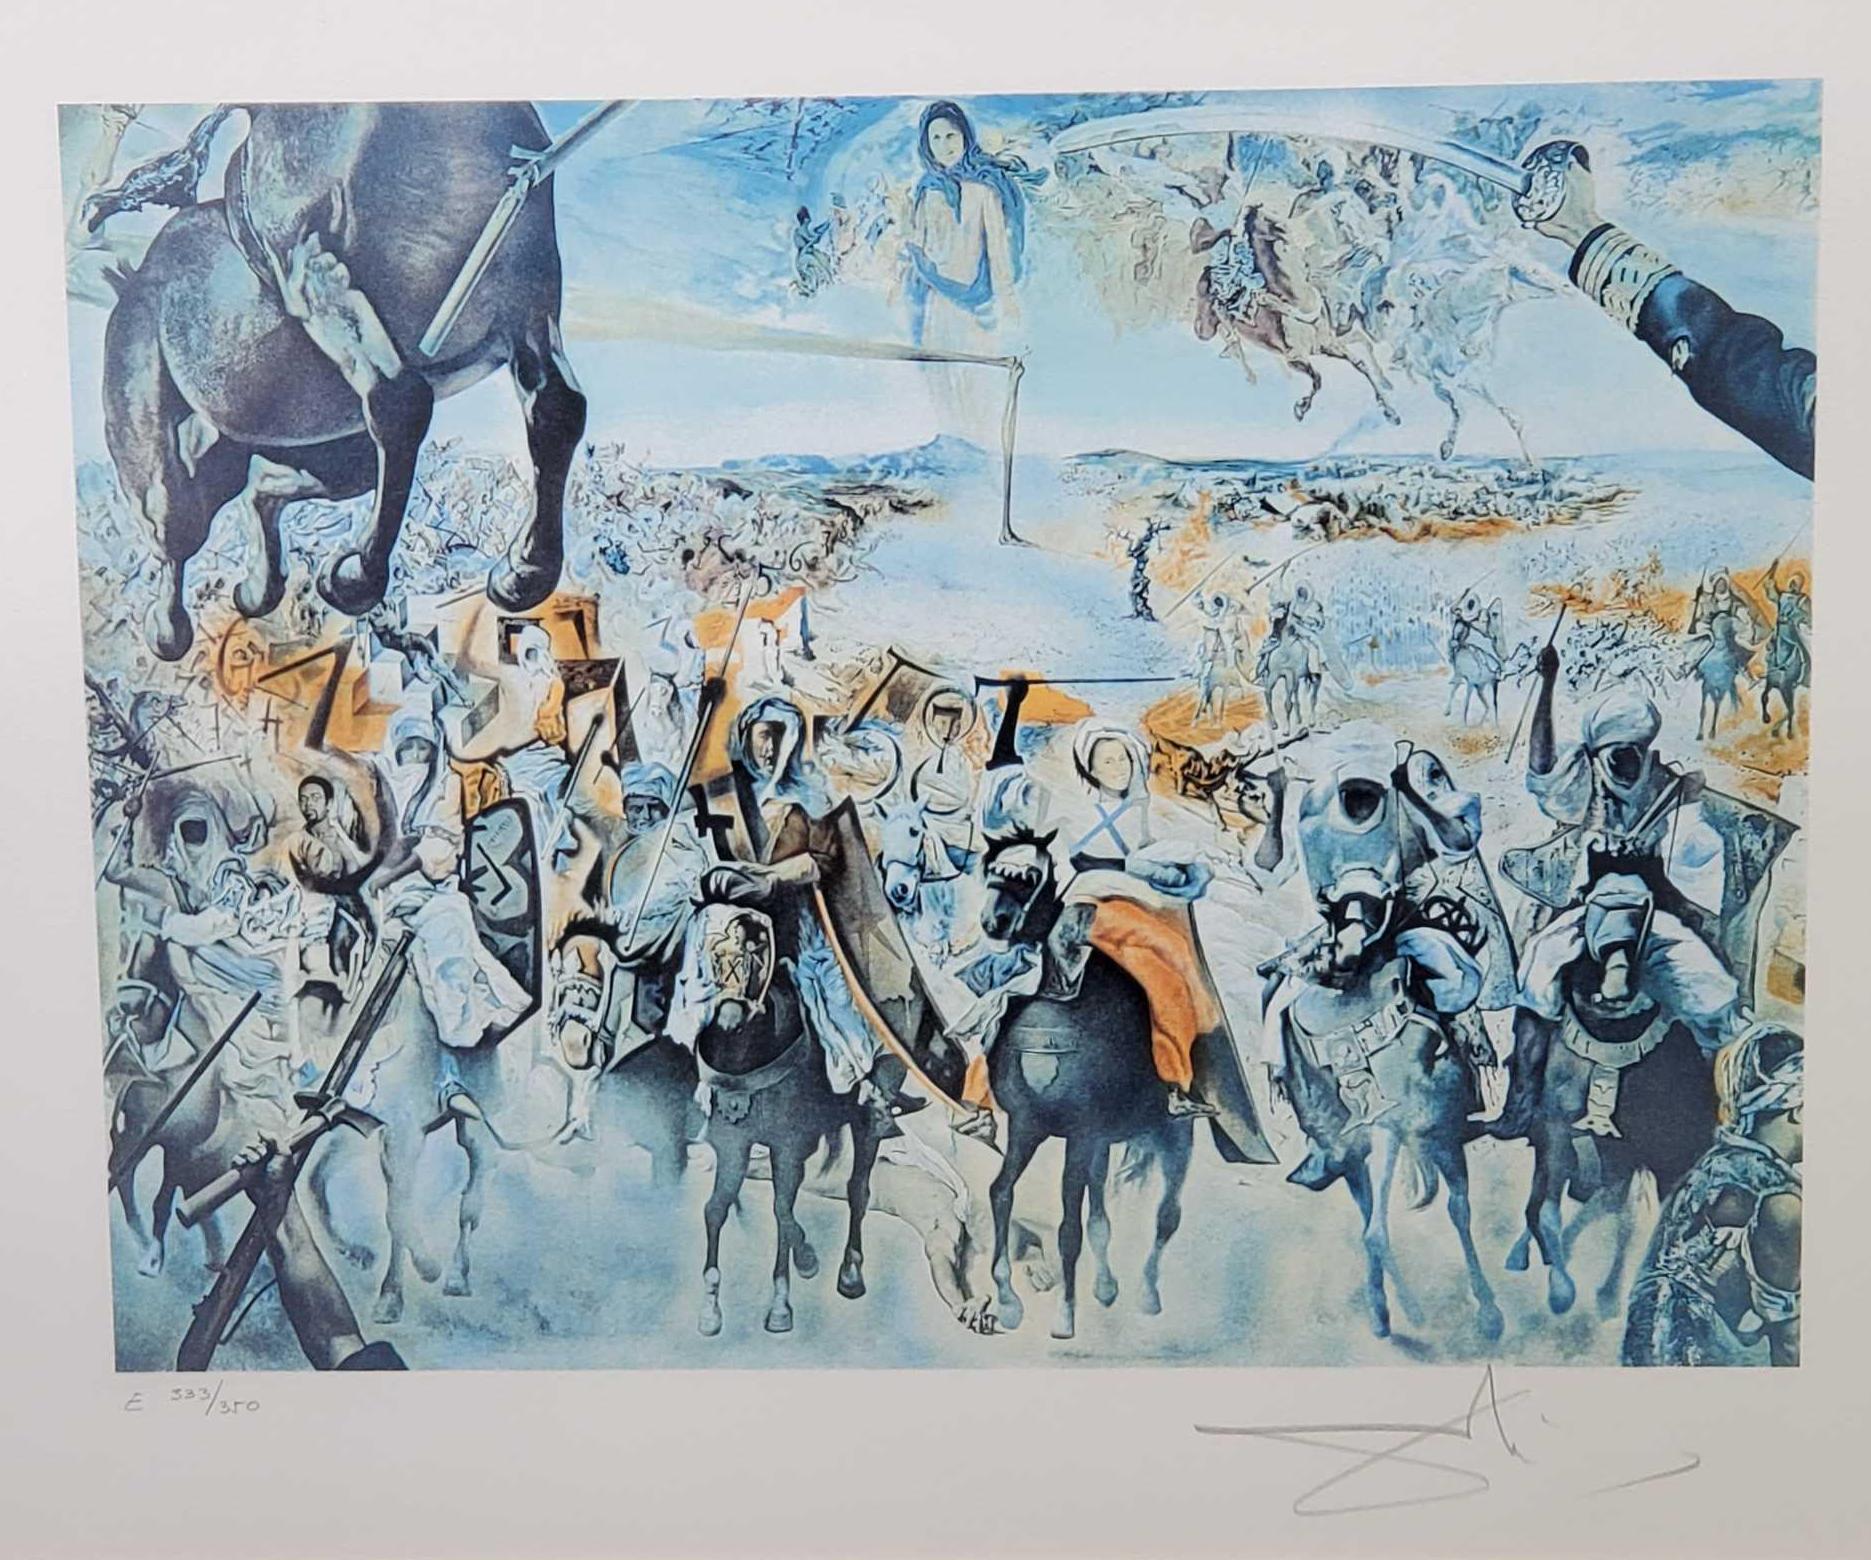 Salvador Dali (1904-1989) "The Battle of Tetuan" Lithograph In Colours, On Woven Paper